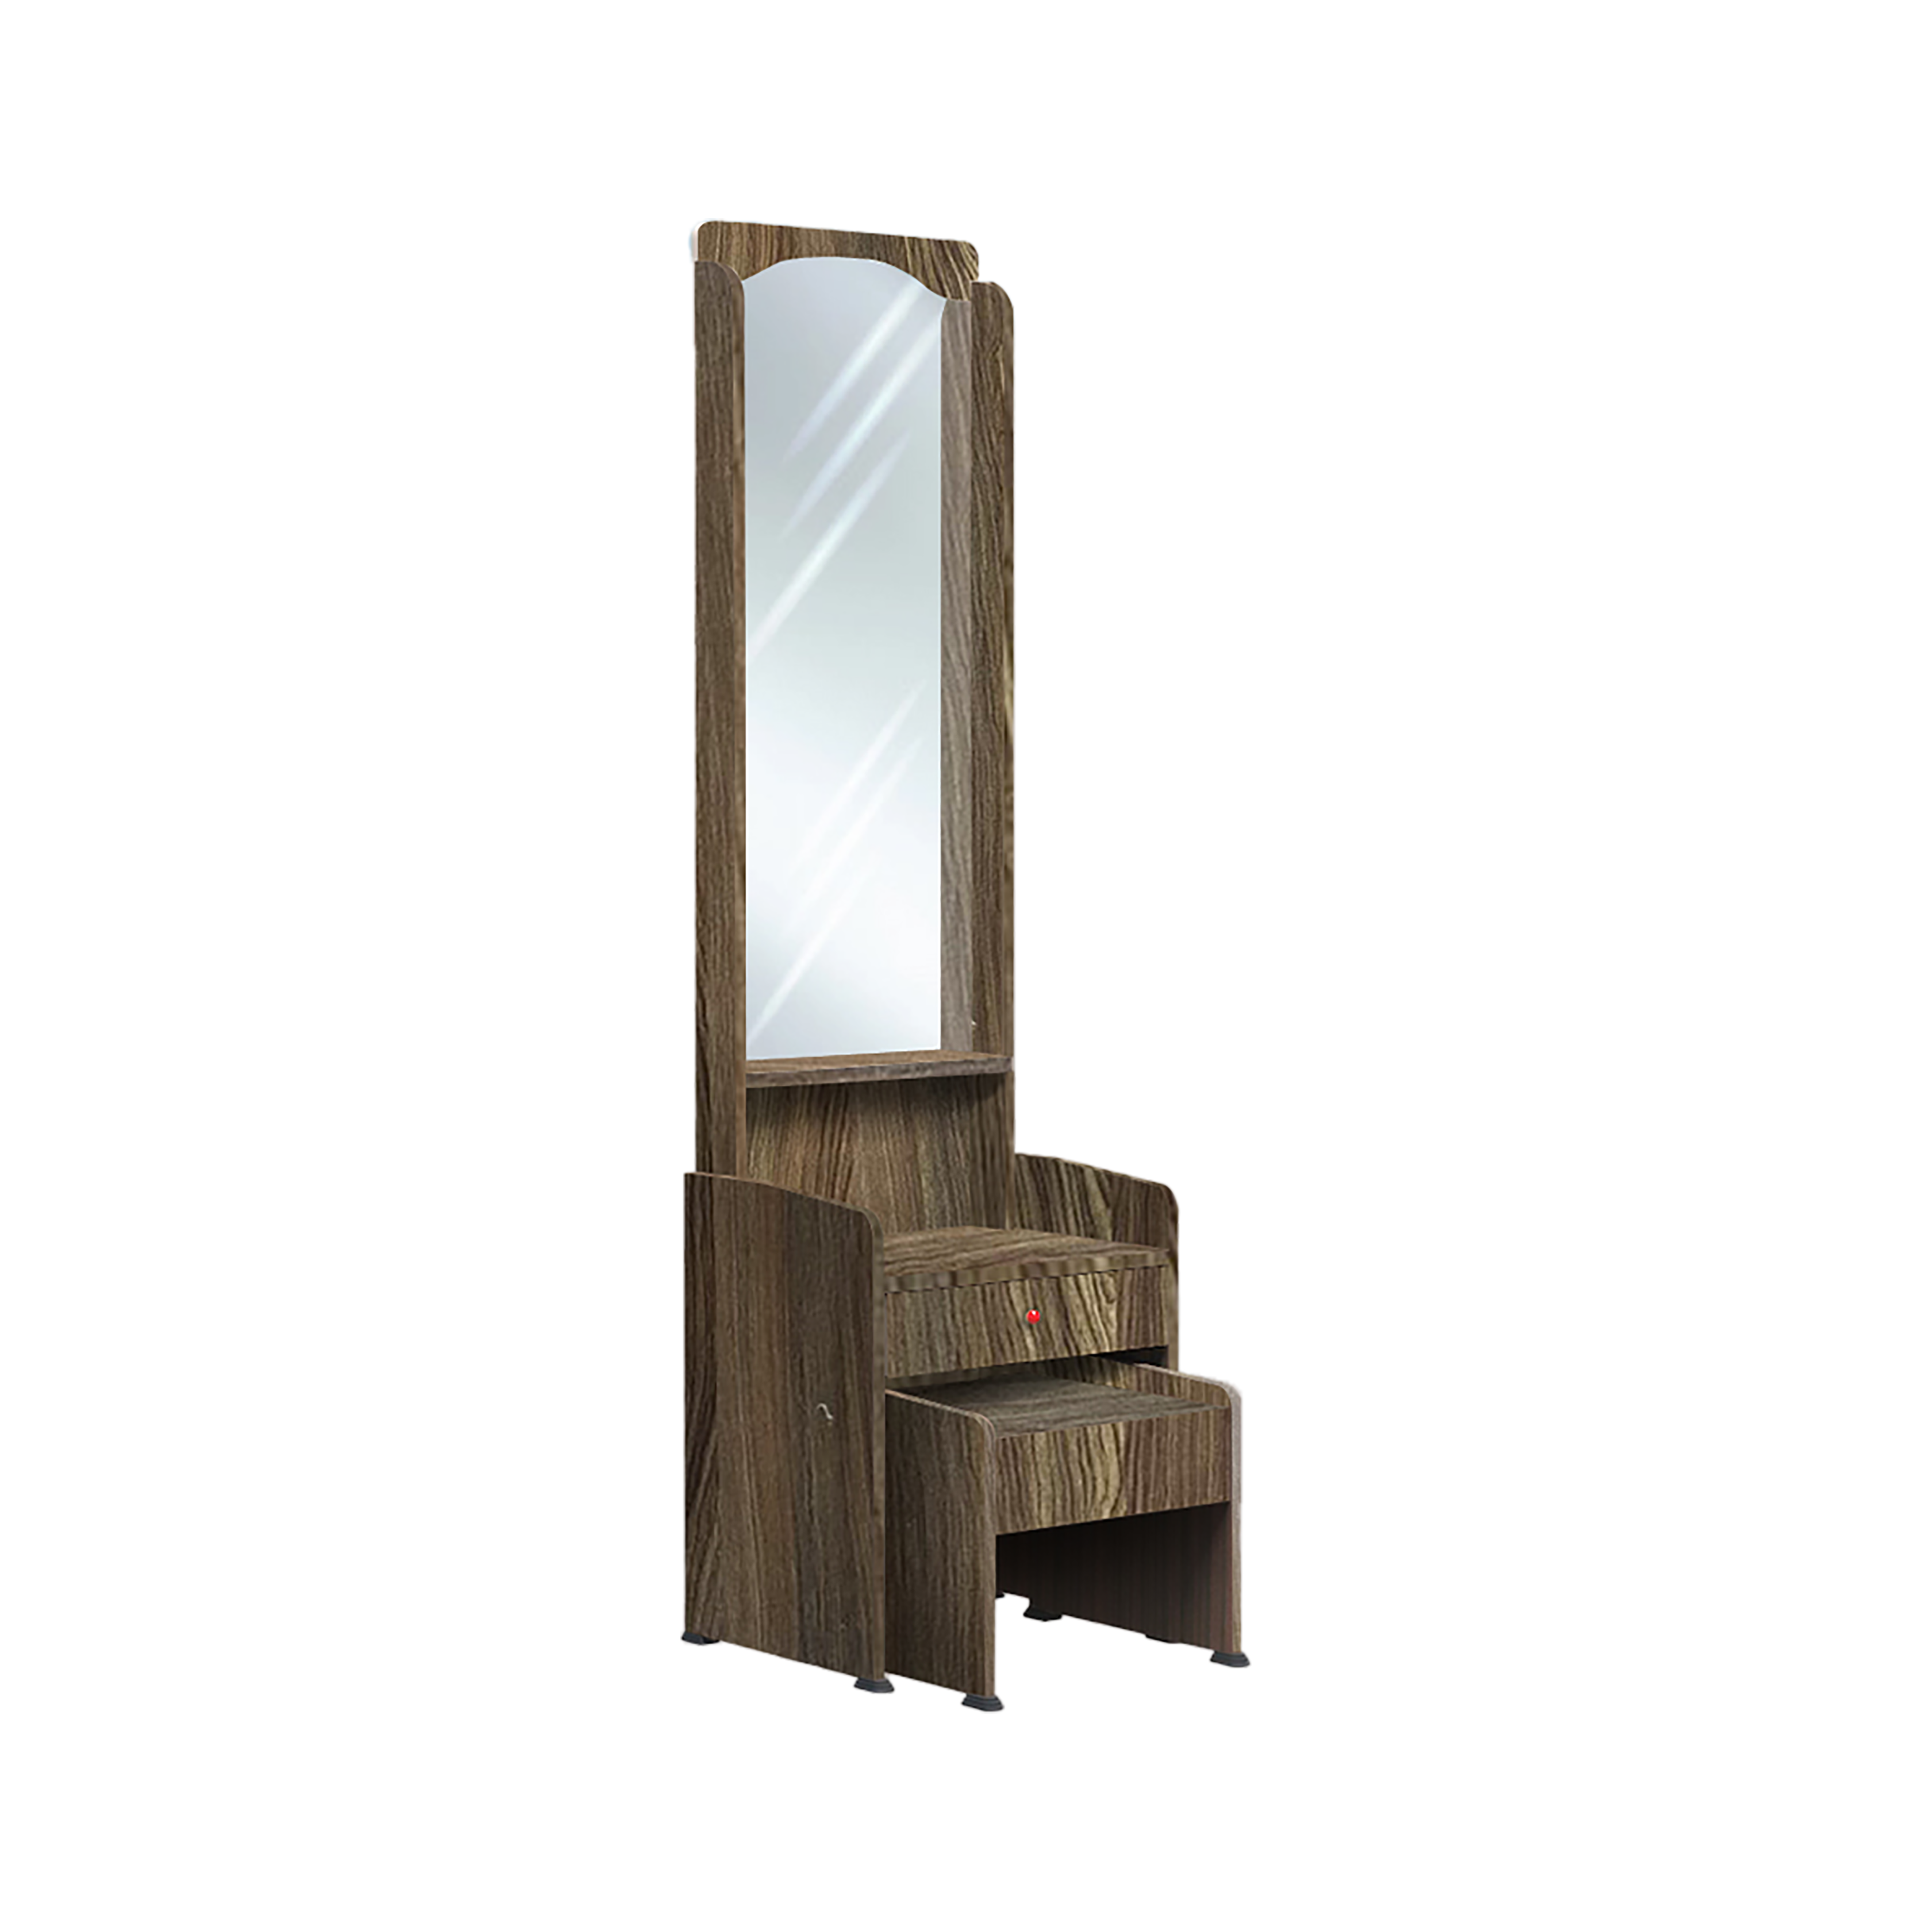 Dressing table - DT002